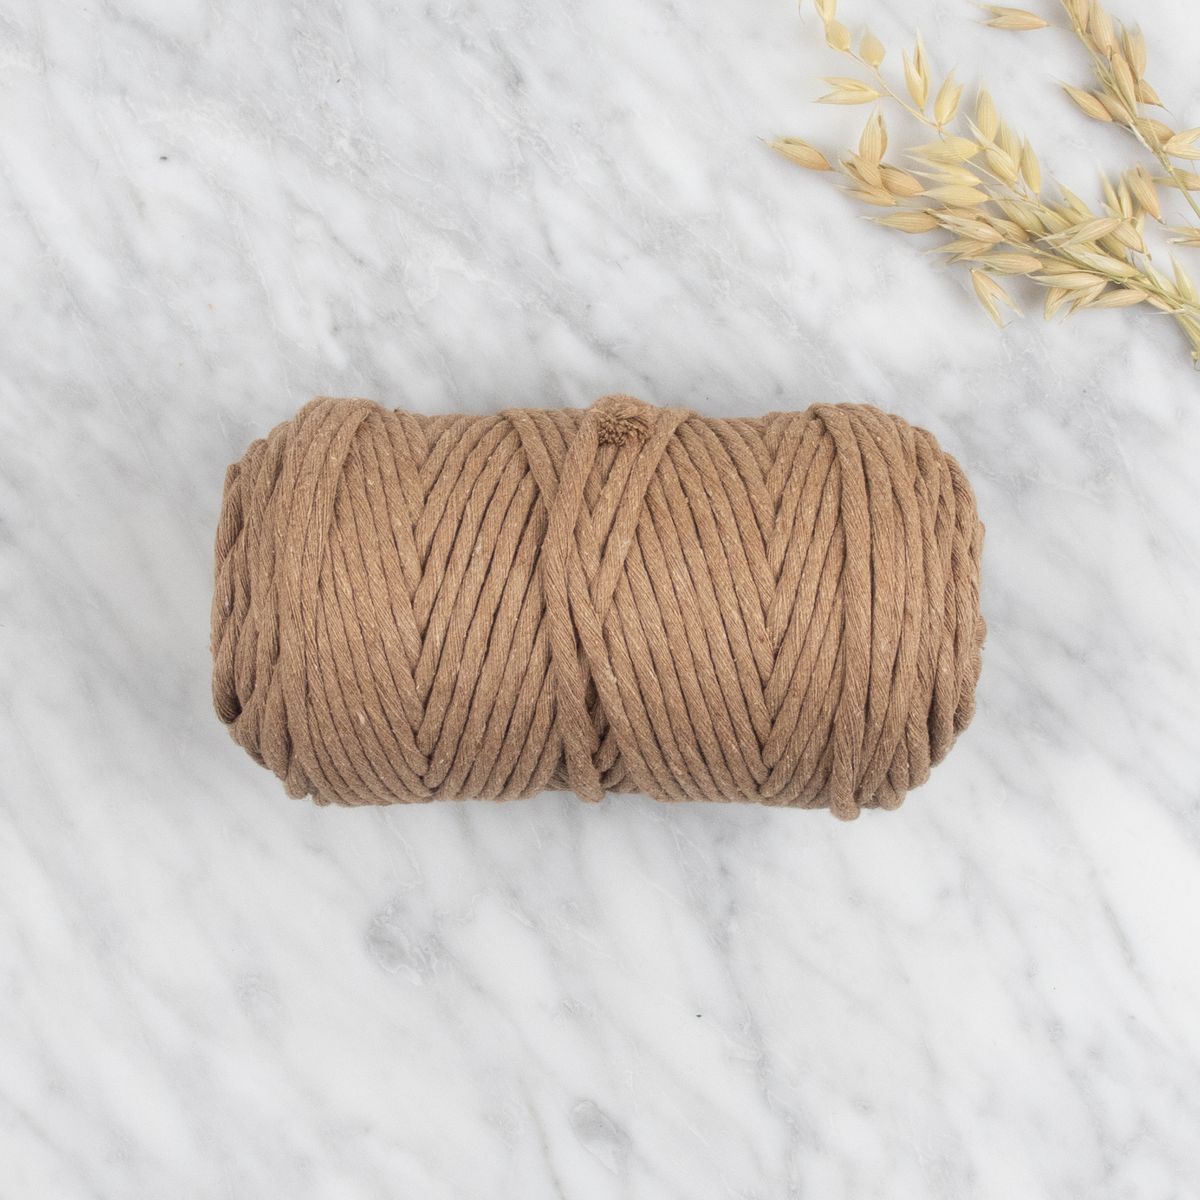 5mm Recycled Cotton String 0.5 kg - Camel